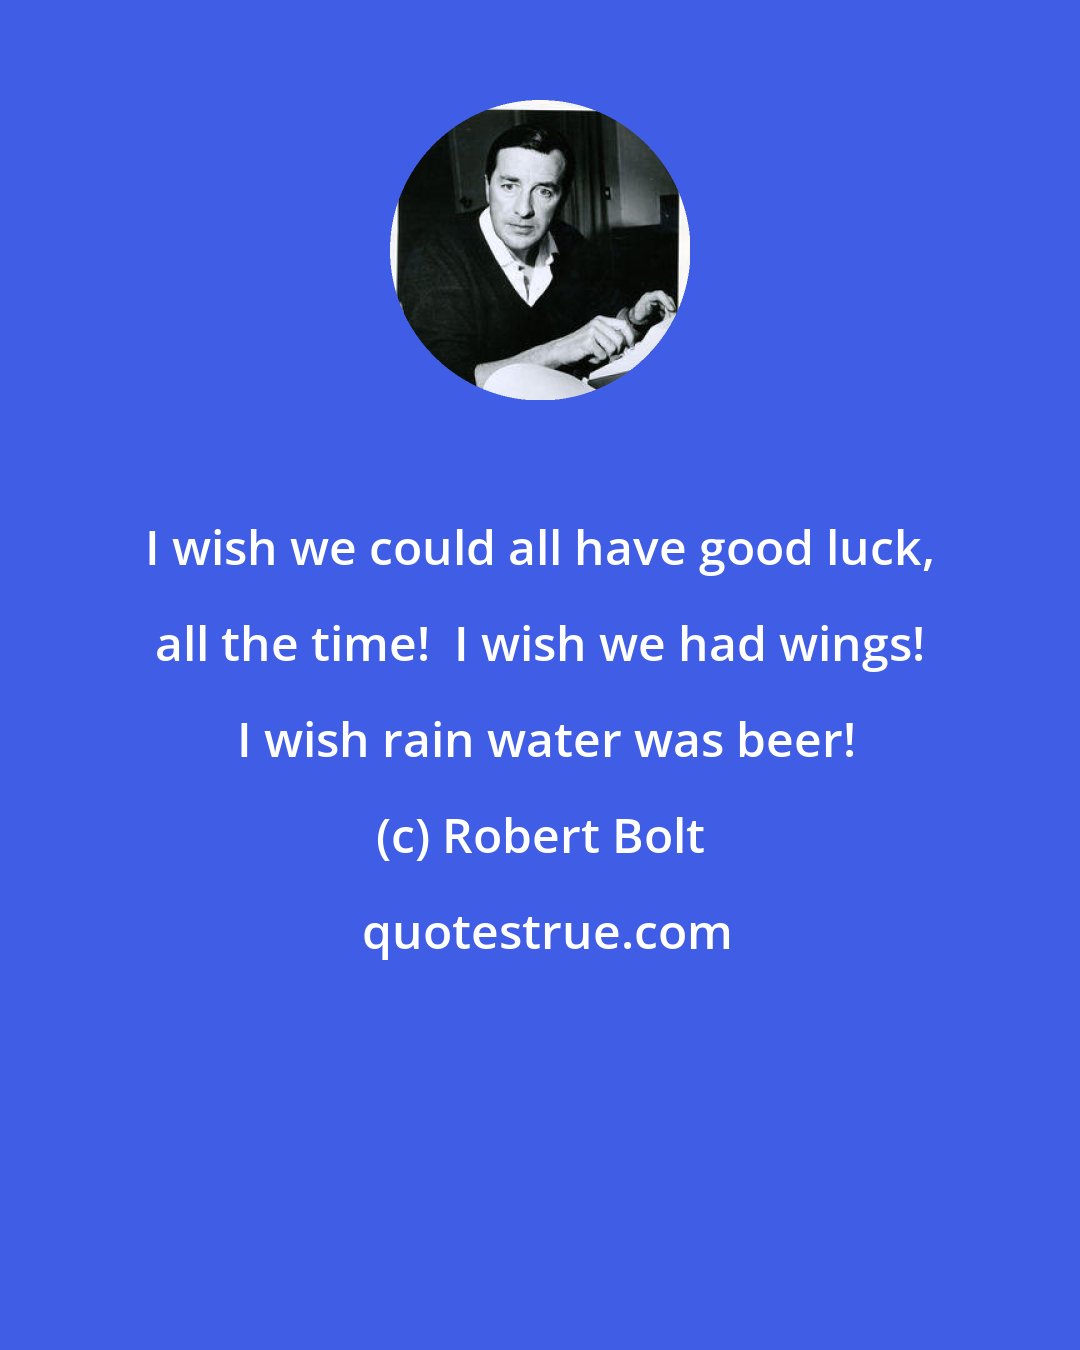 Robert Bolt: I wish we could all have good luck, all the time!  I wish we had wings!  I wish rain water was beer!